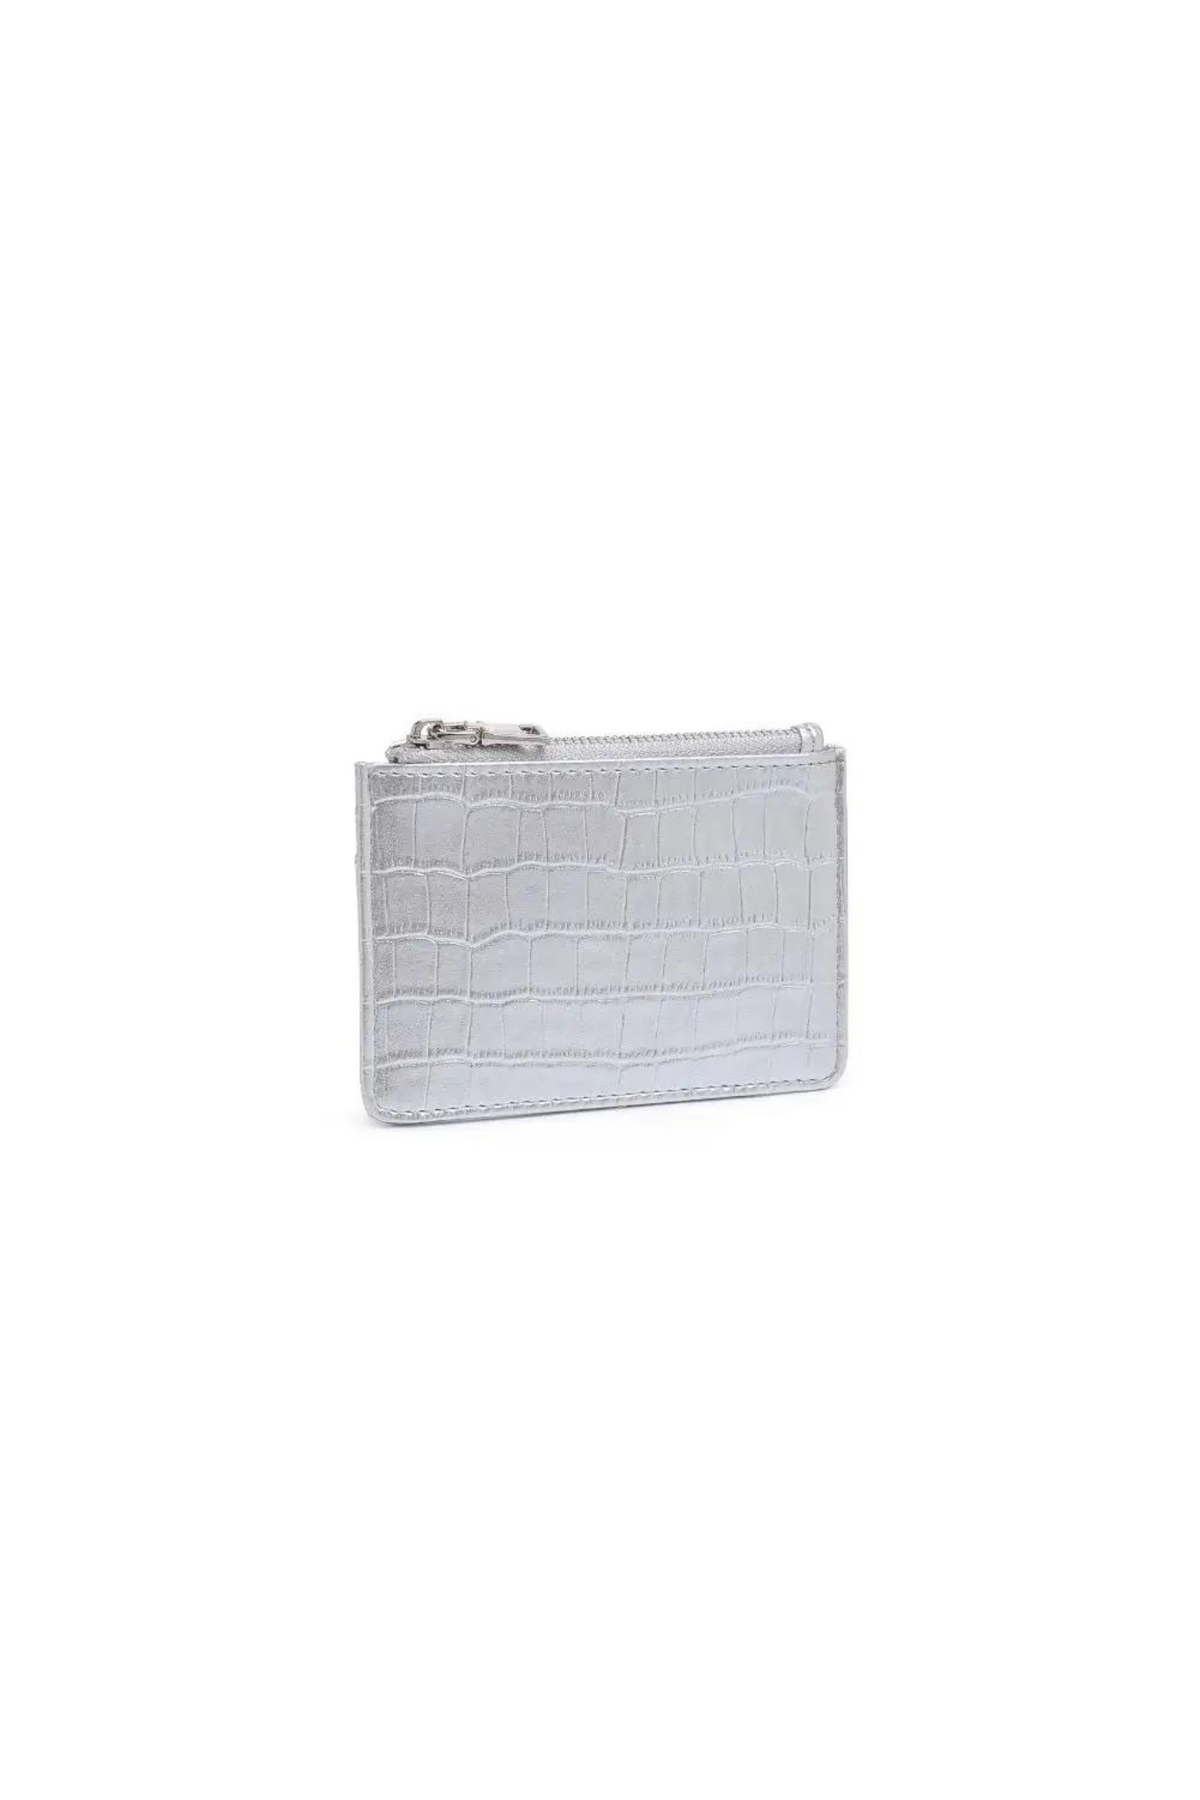 Urban Expressions | Afina Wallet Gold &amp; Silver | Sweetest Stitch